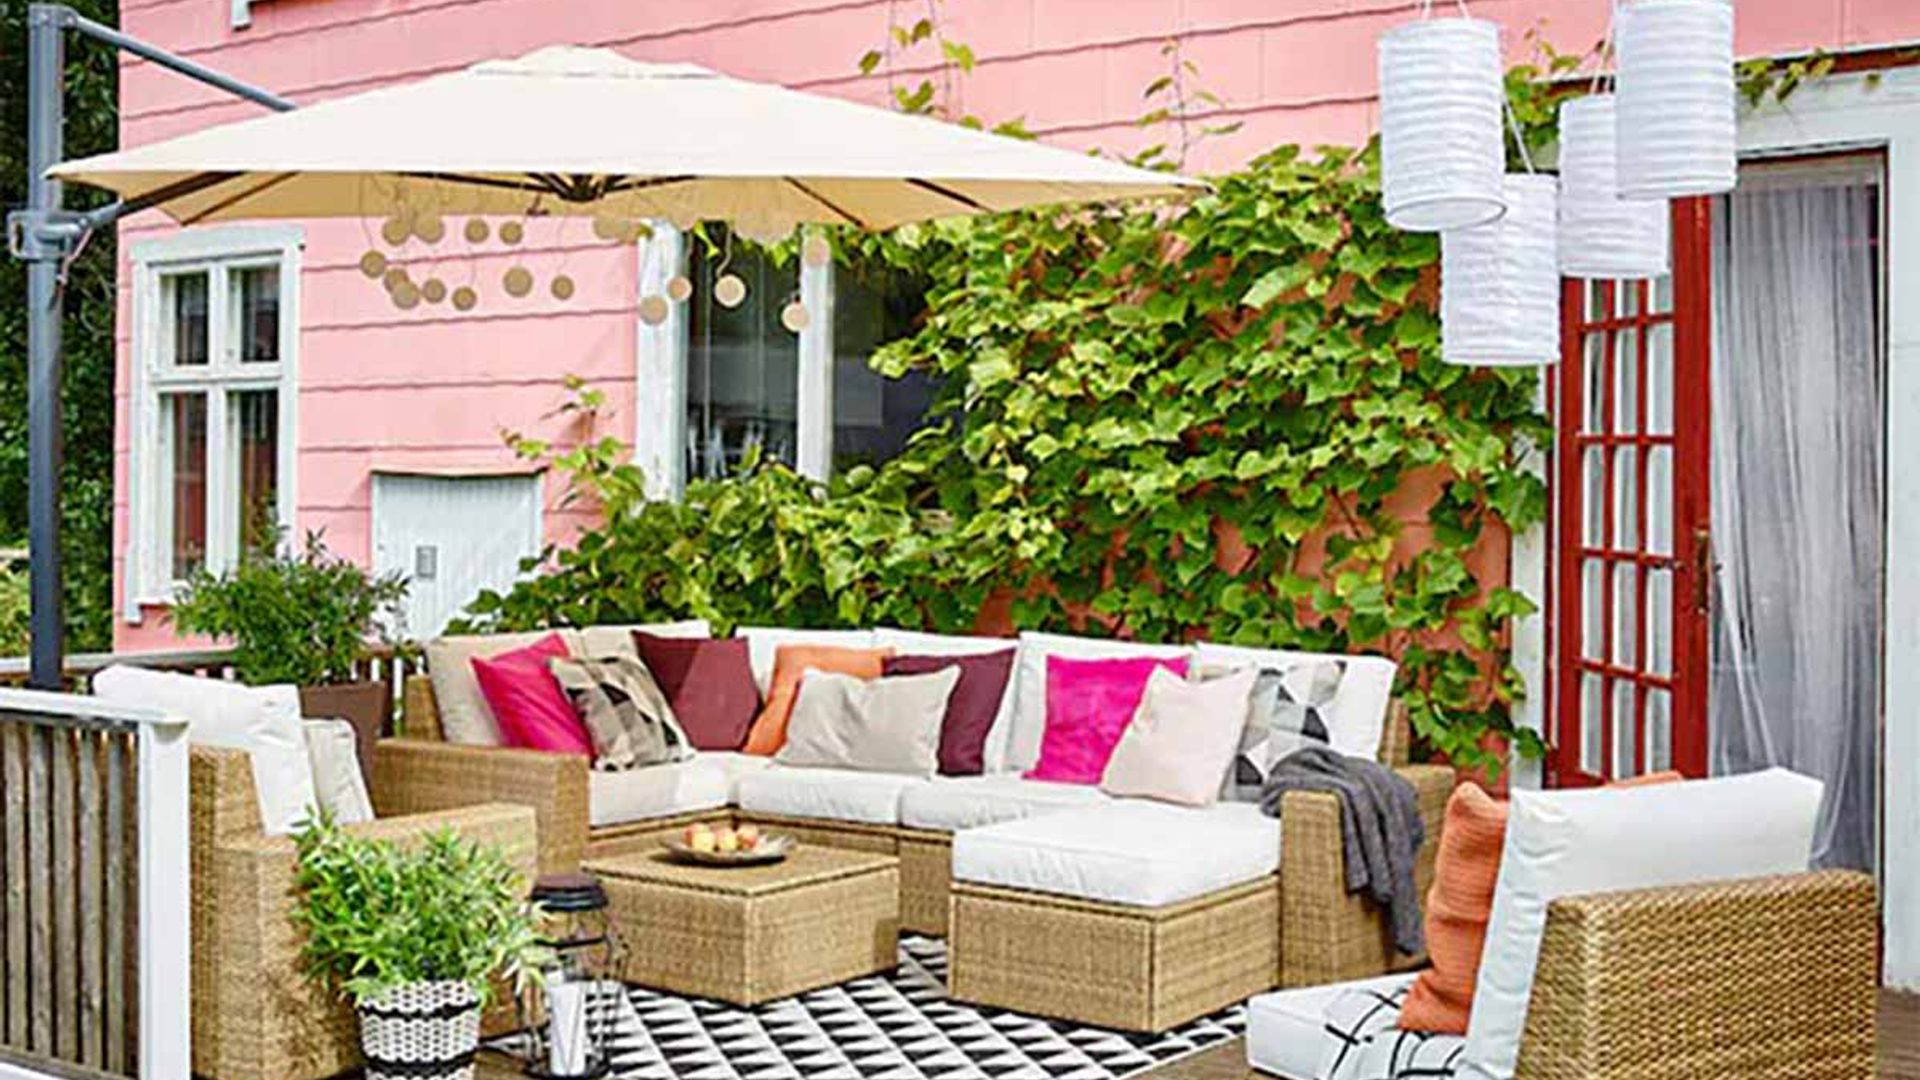 The Best Outdoor Rugs For Your Garden 2021 From Ikea To Made John Lewis More Hello